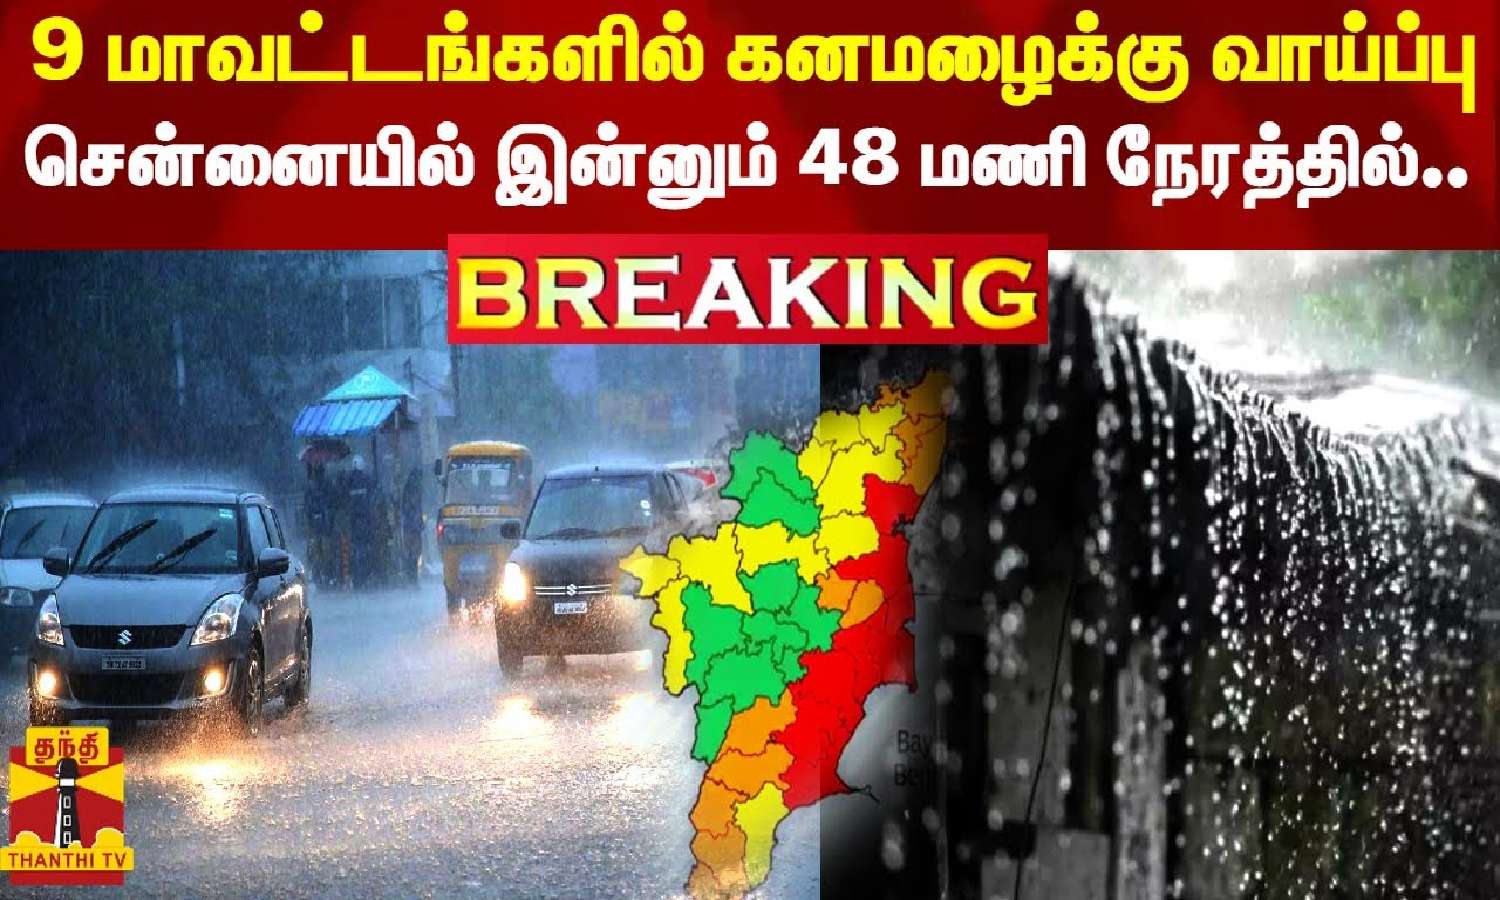 Chance of heavy rain in 9 districts